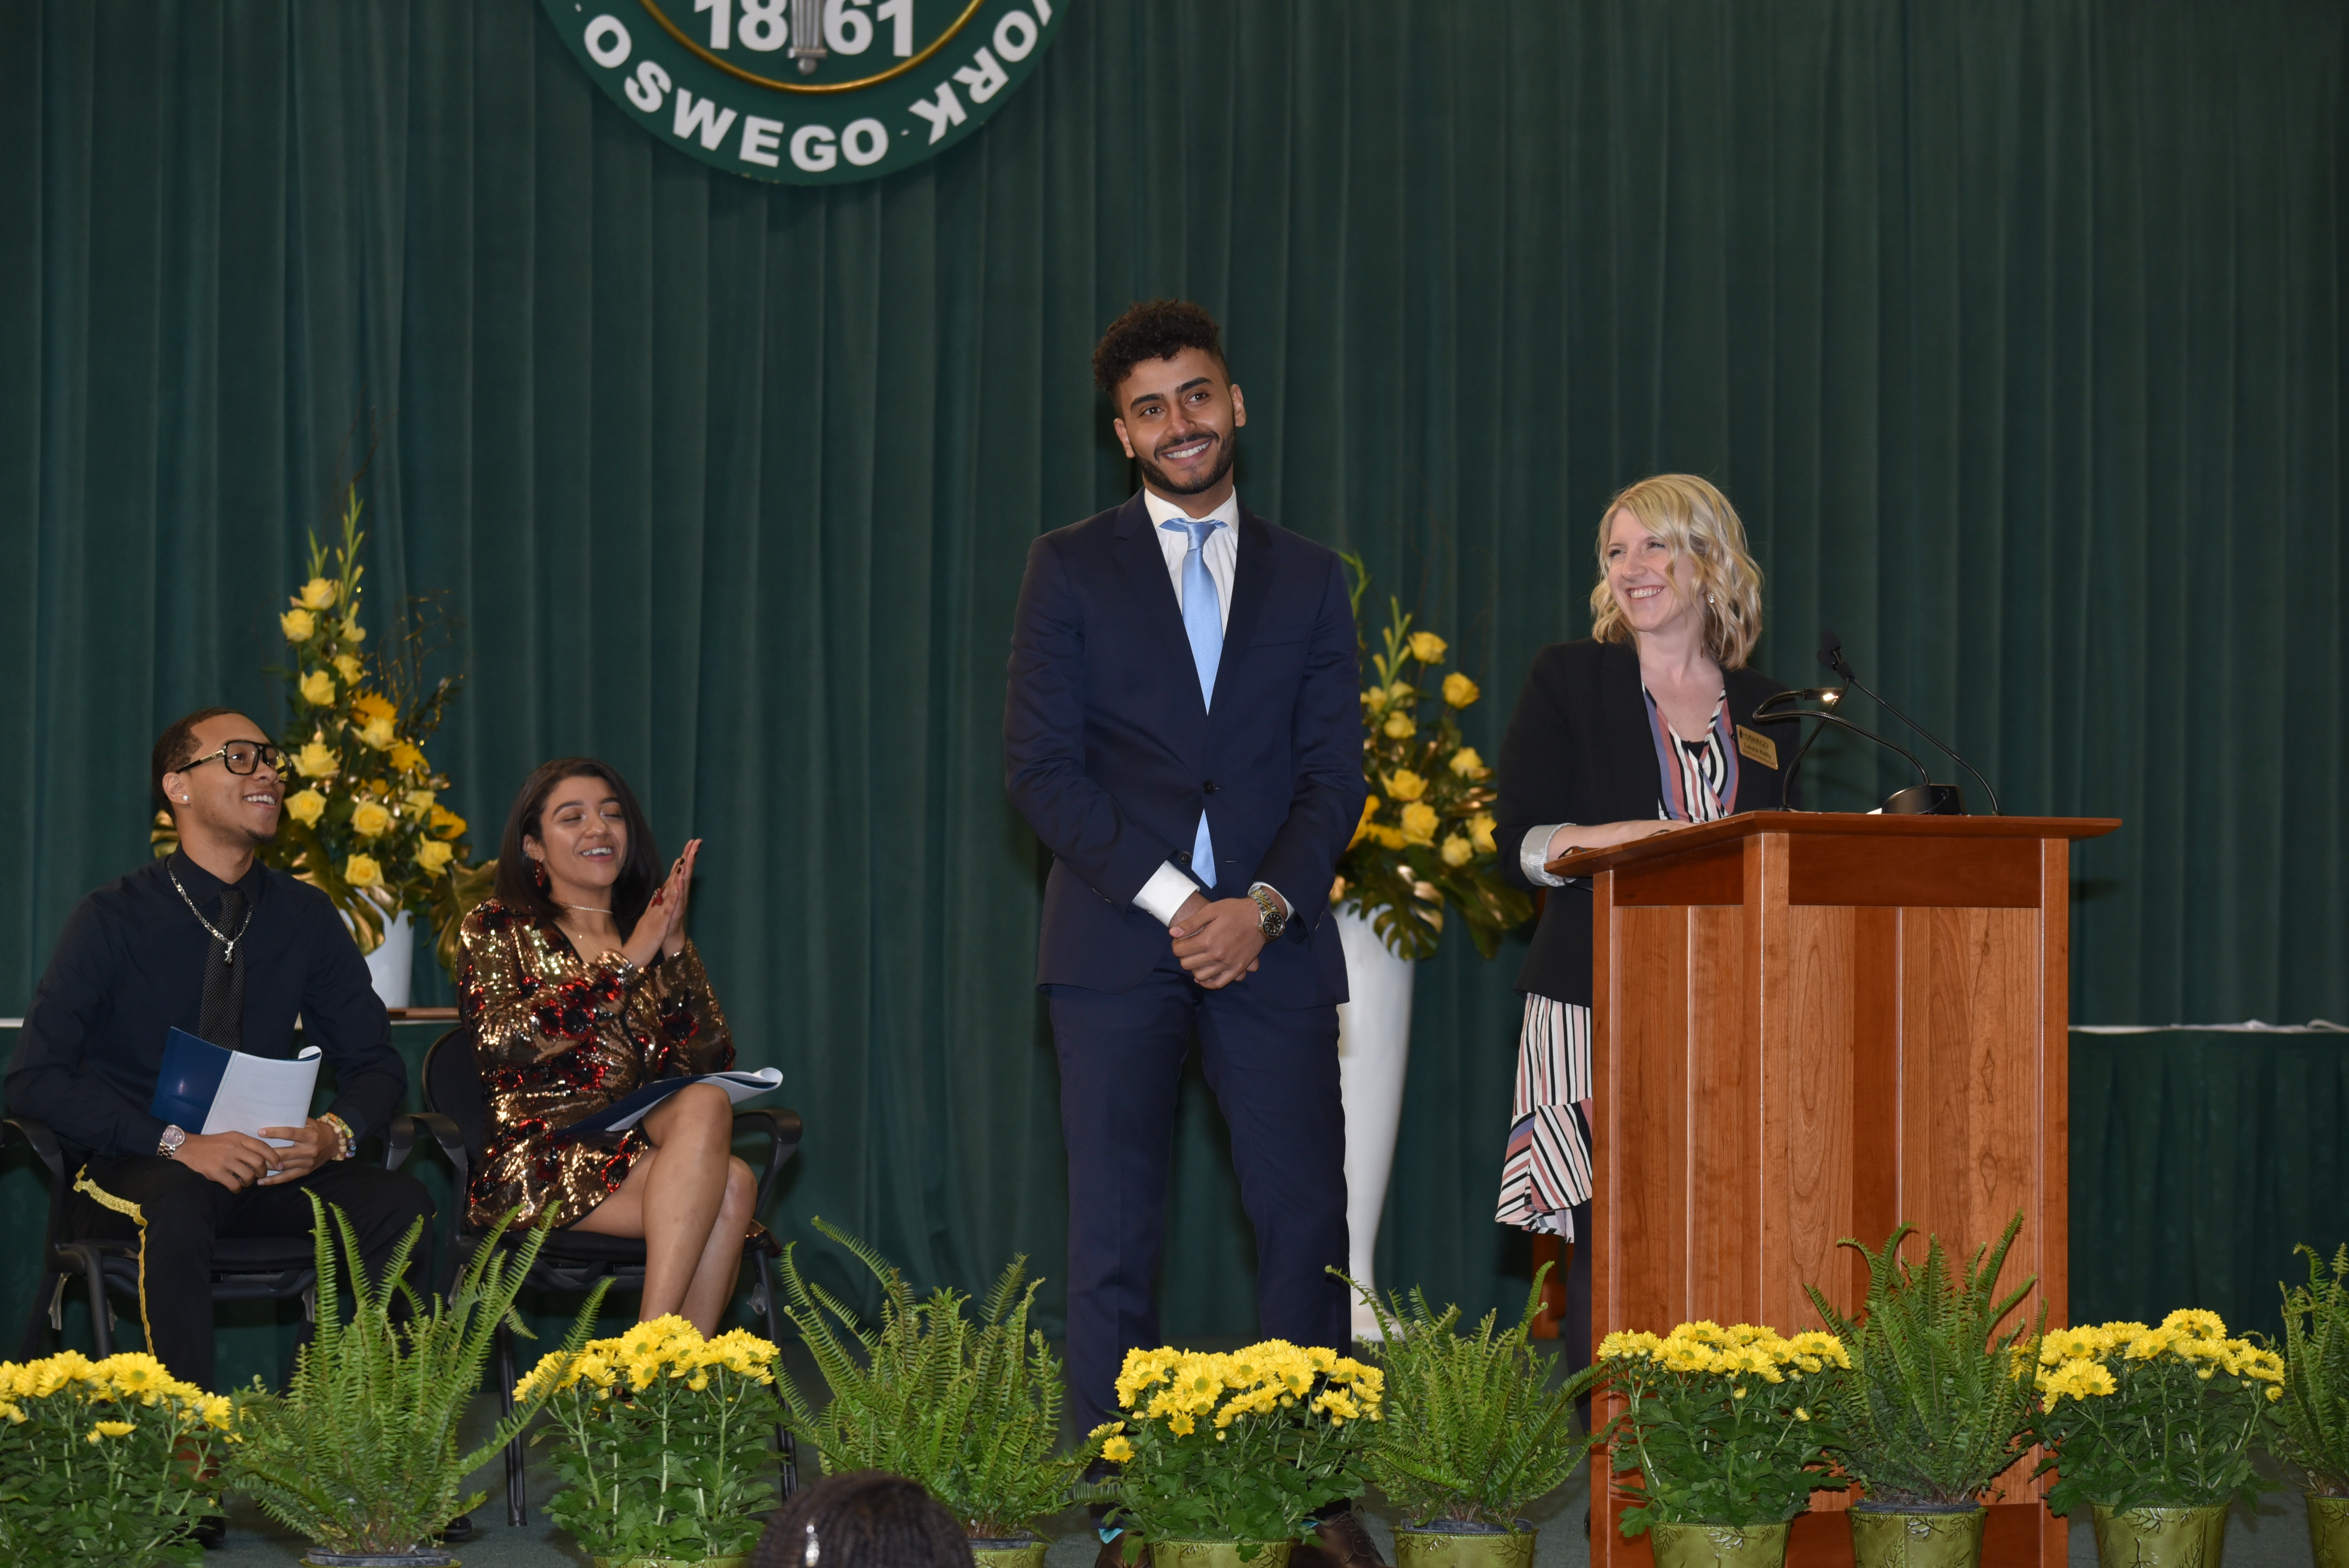 Pictured: Ahmed Albajari at commencement eve